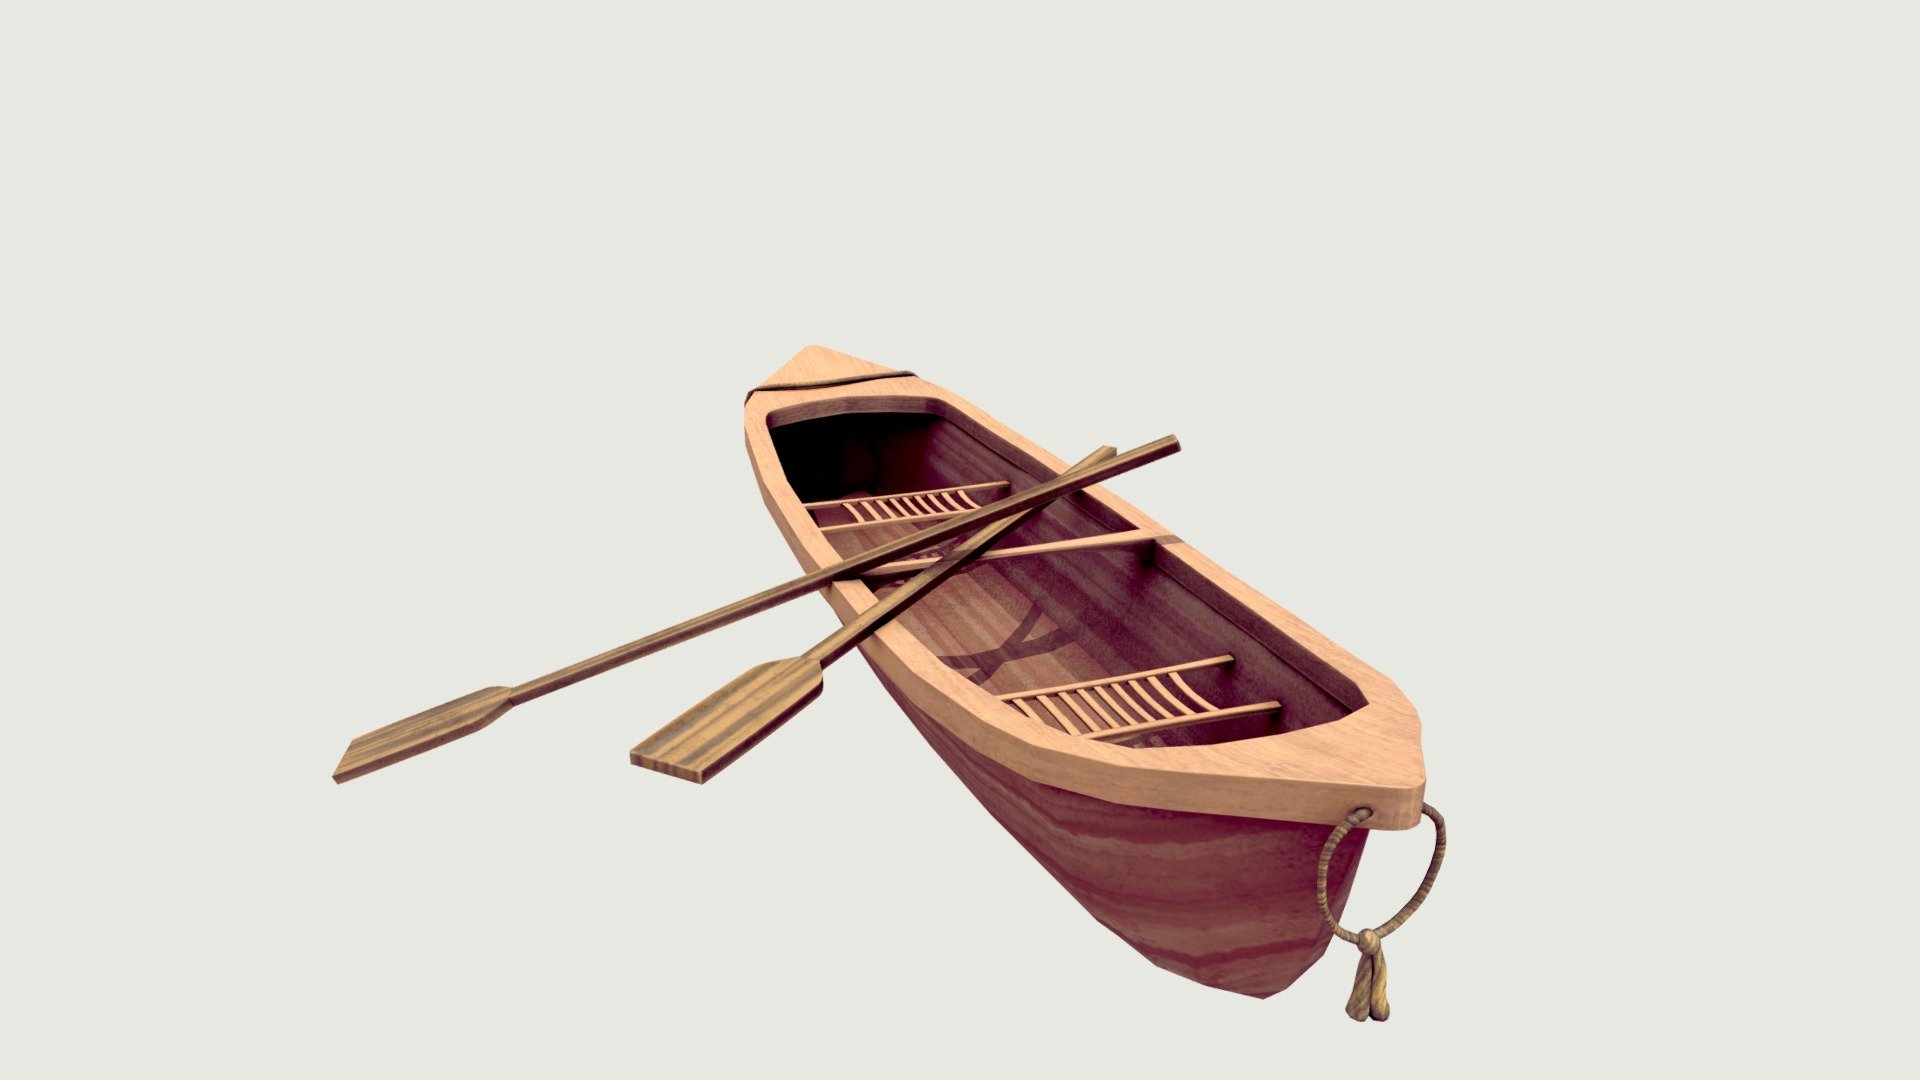 Still learning Blender. Decided to make a canoe, as it had a more challenging shape 3d model